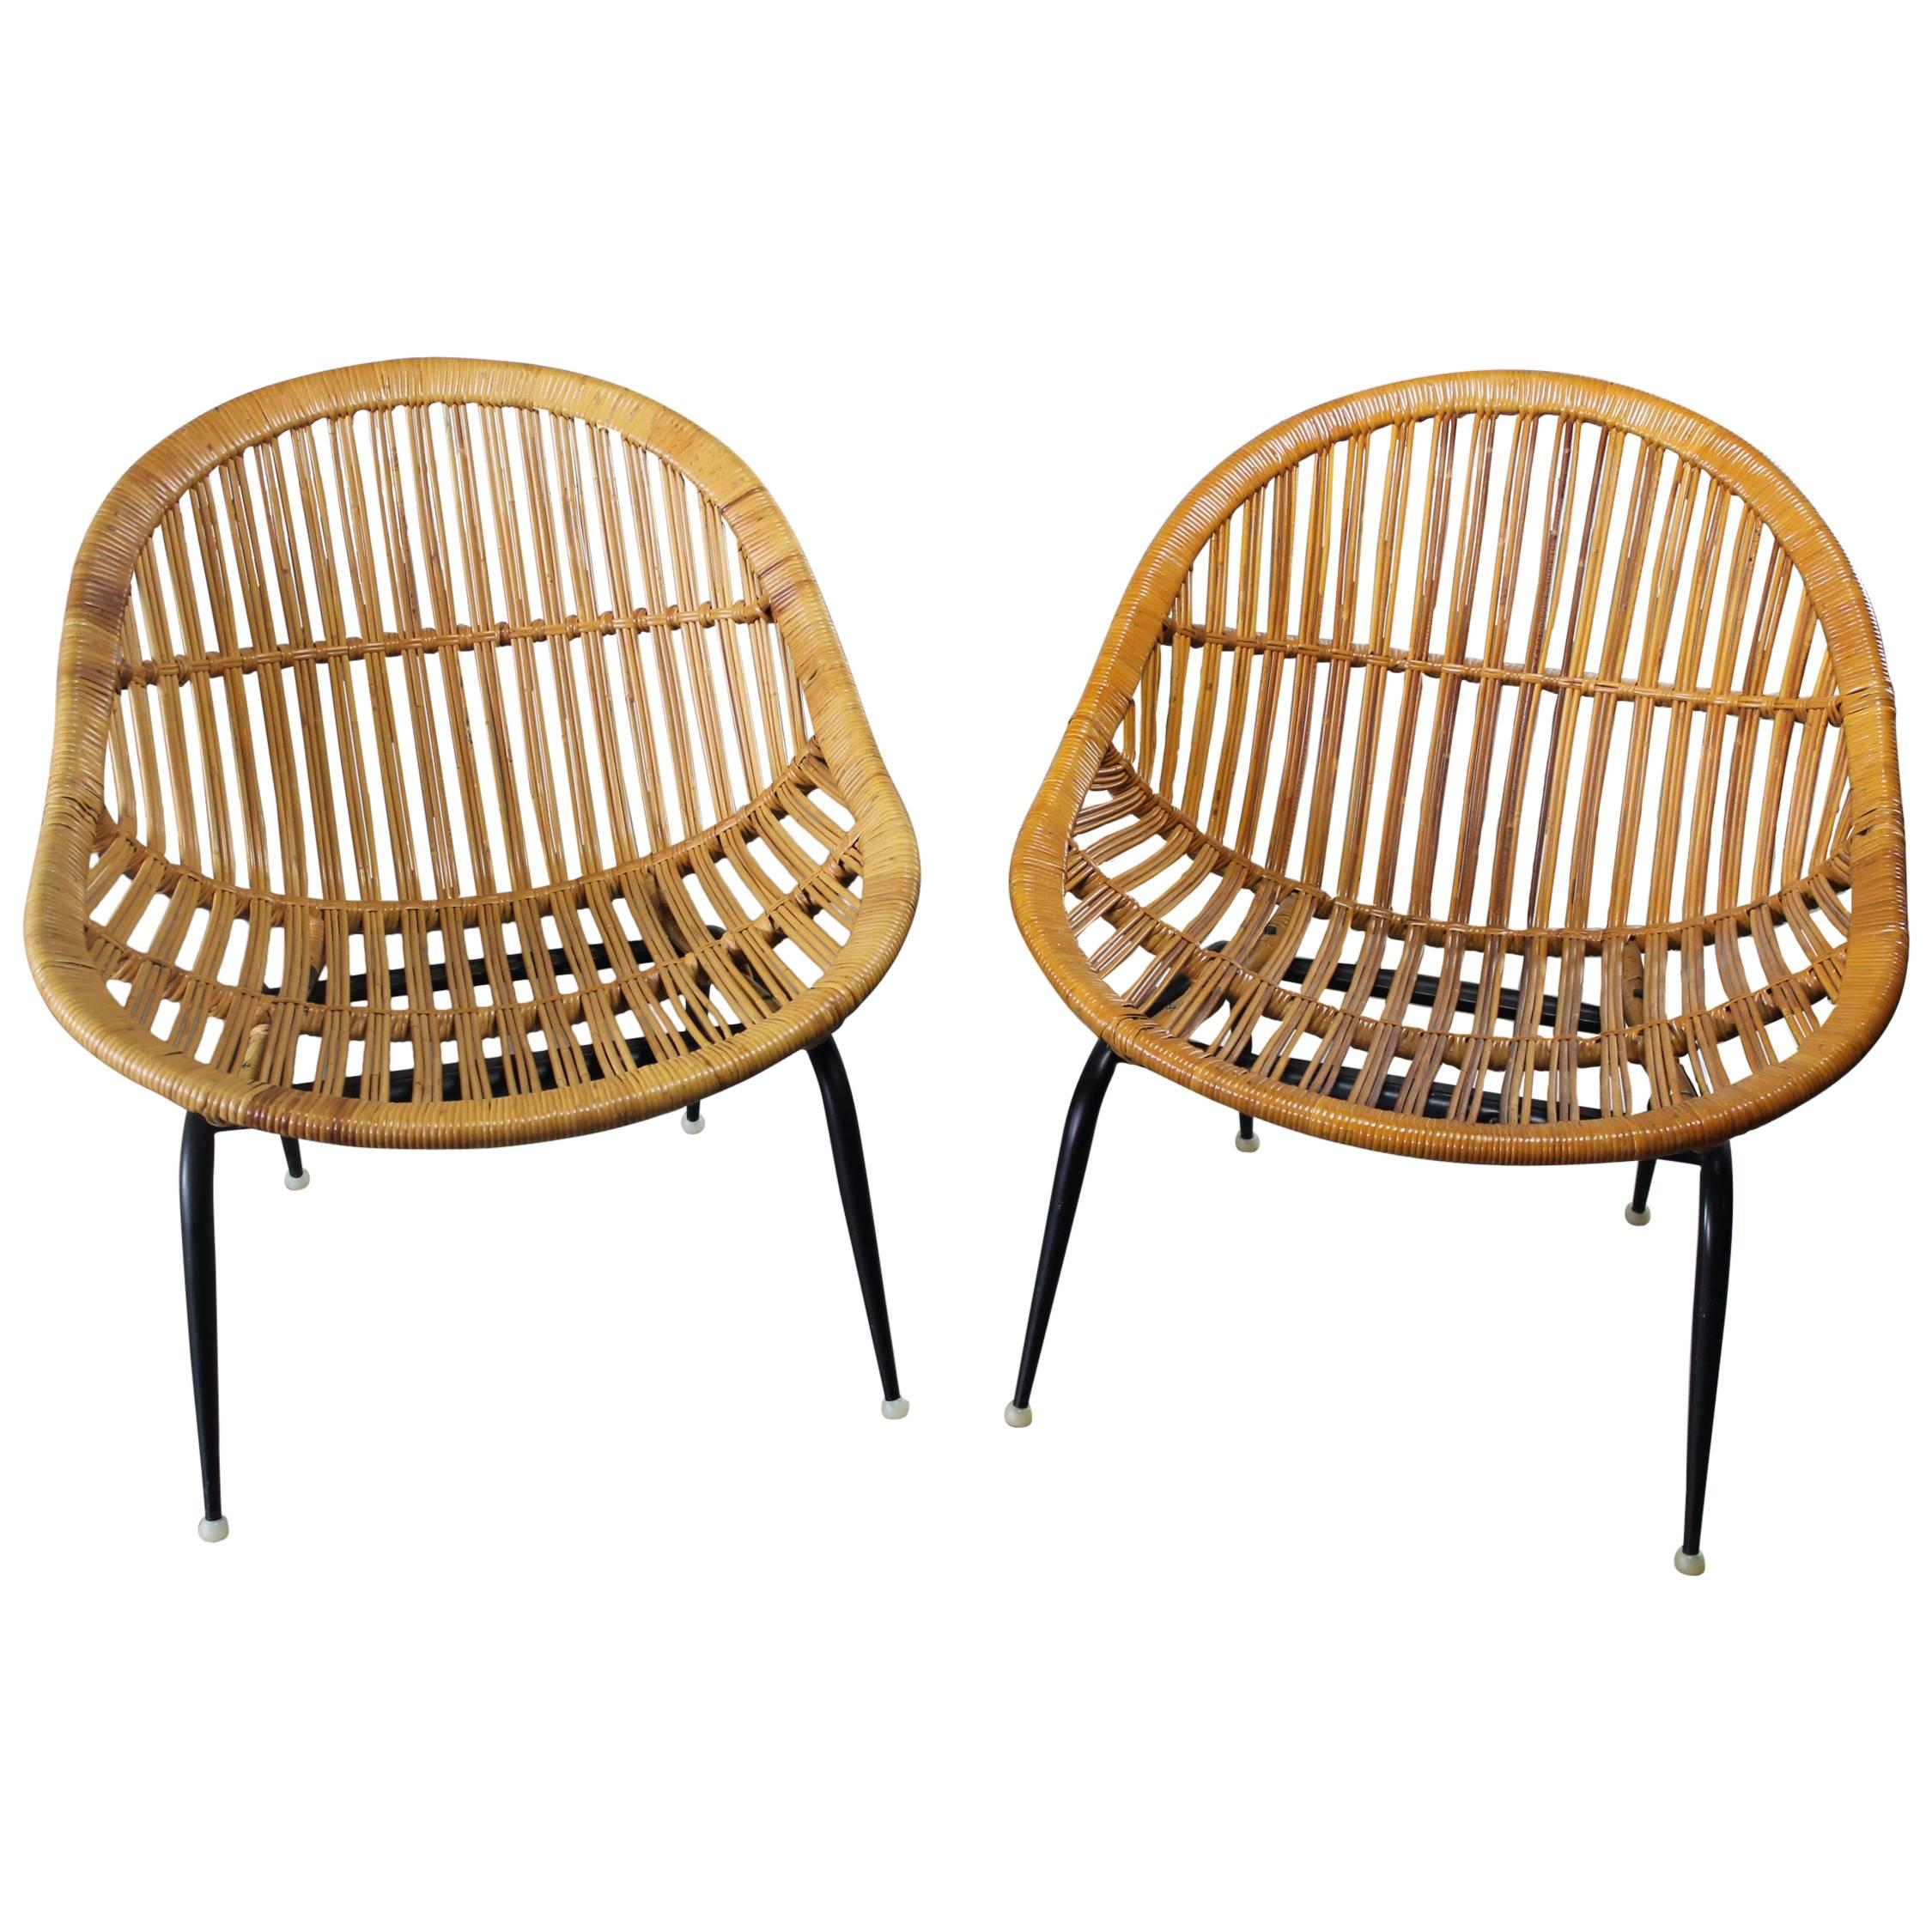 Pair of Mid-Century Modern Rattan Wicker Basket Chairs by Troy Sunshade Company